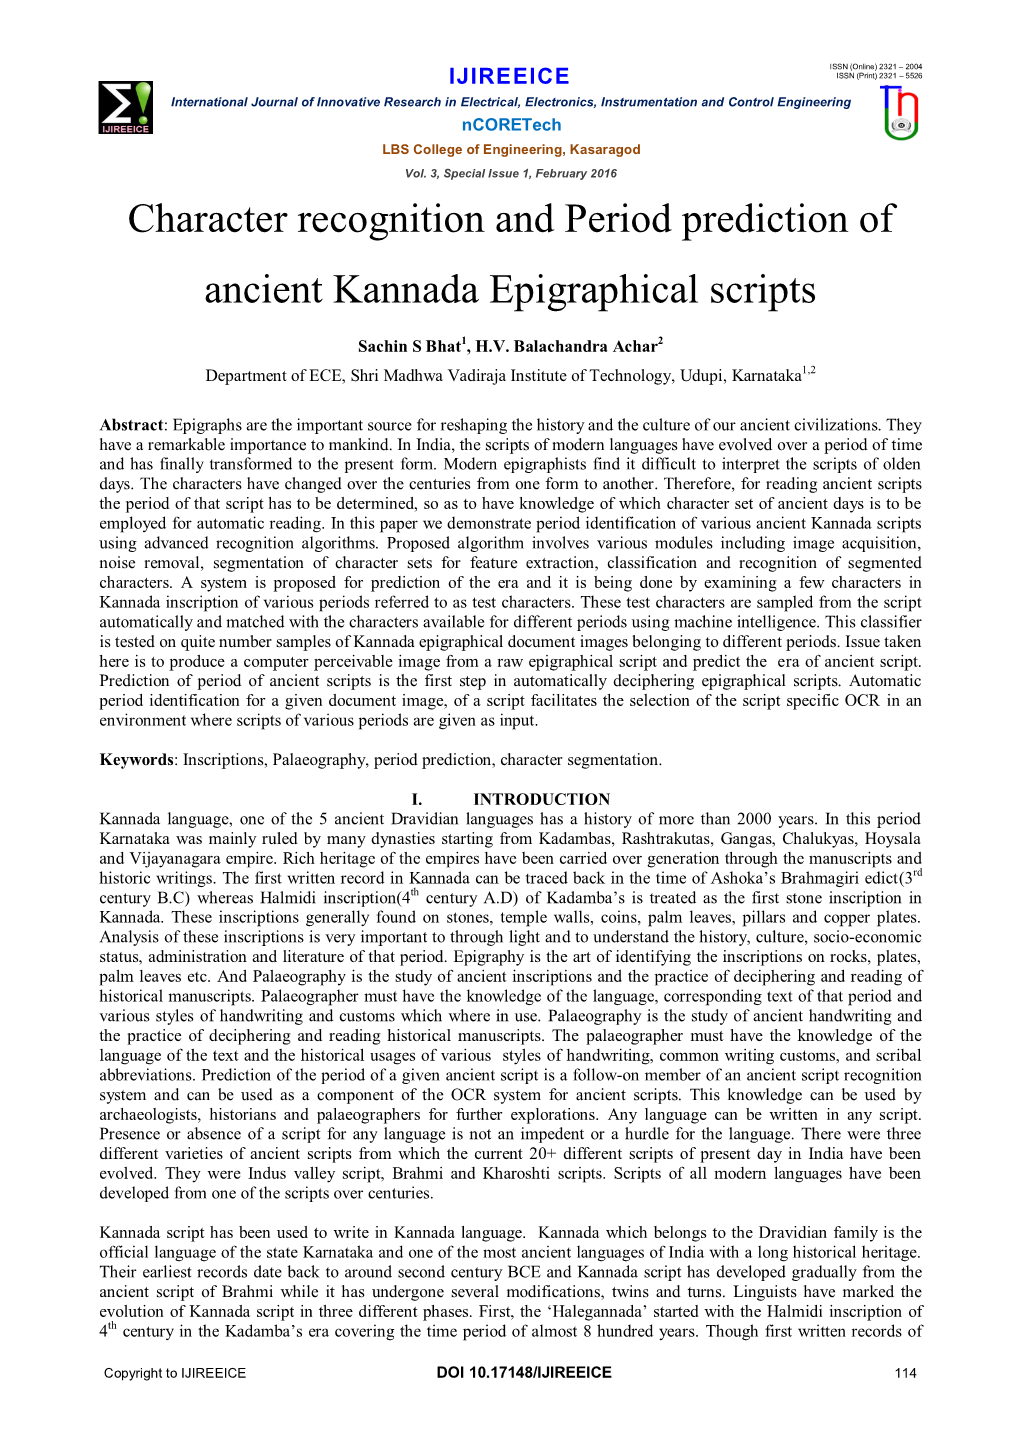 Character Recognition and Period Prediction of Ancient Kannada Epigraphical Scripts